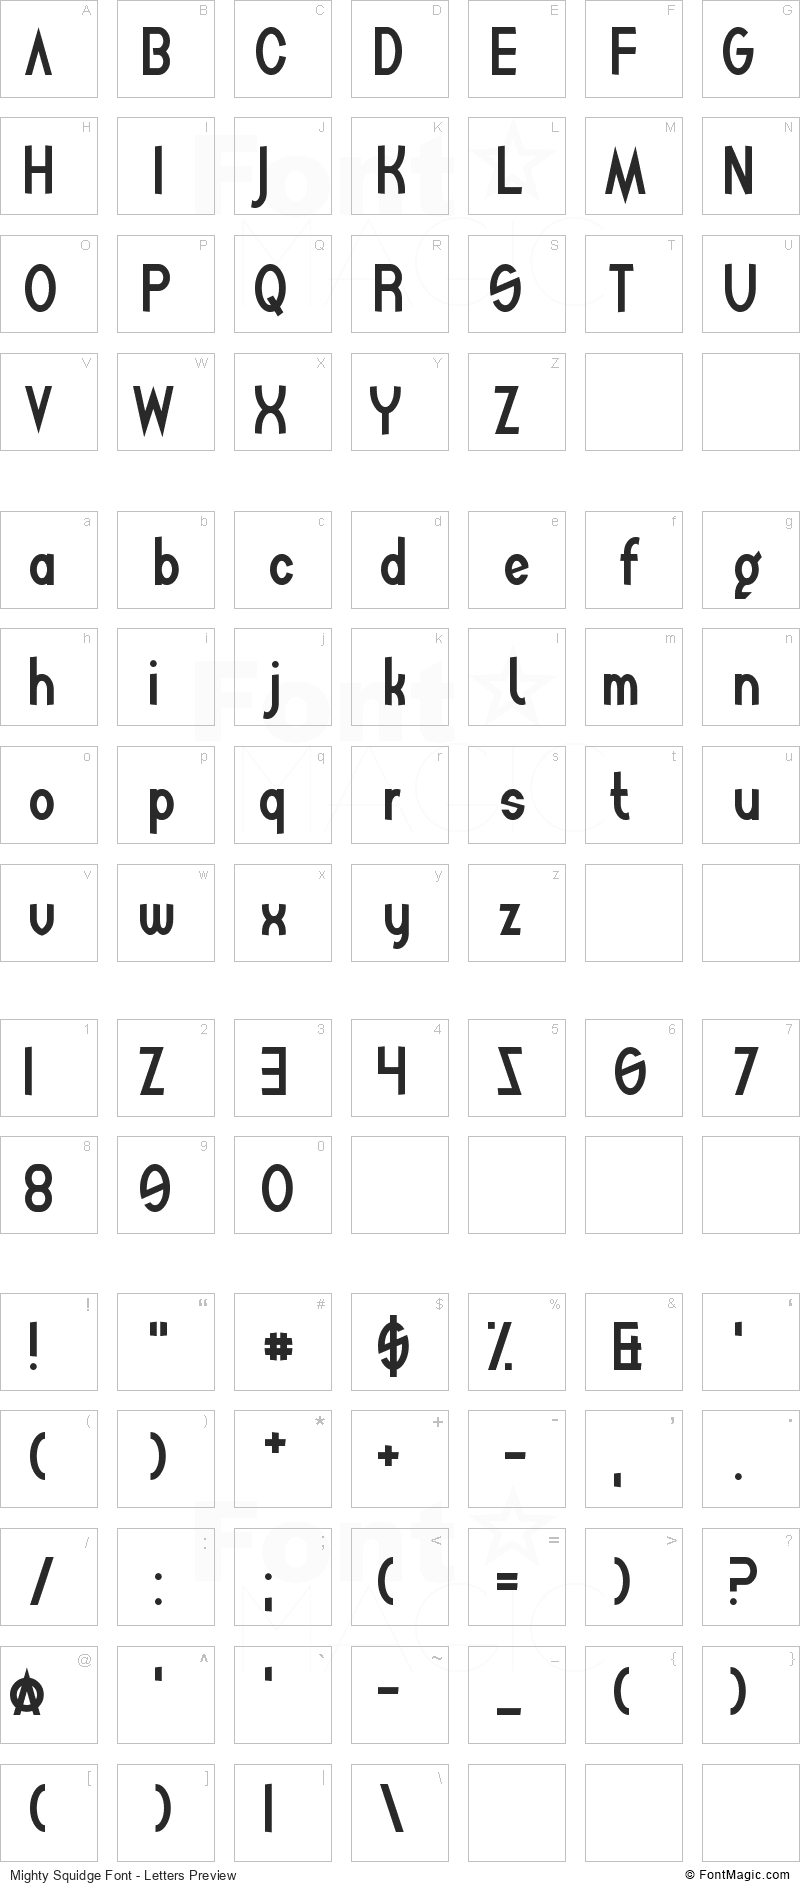 Mighty Squidge Font - All Latters Preview Chart